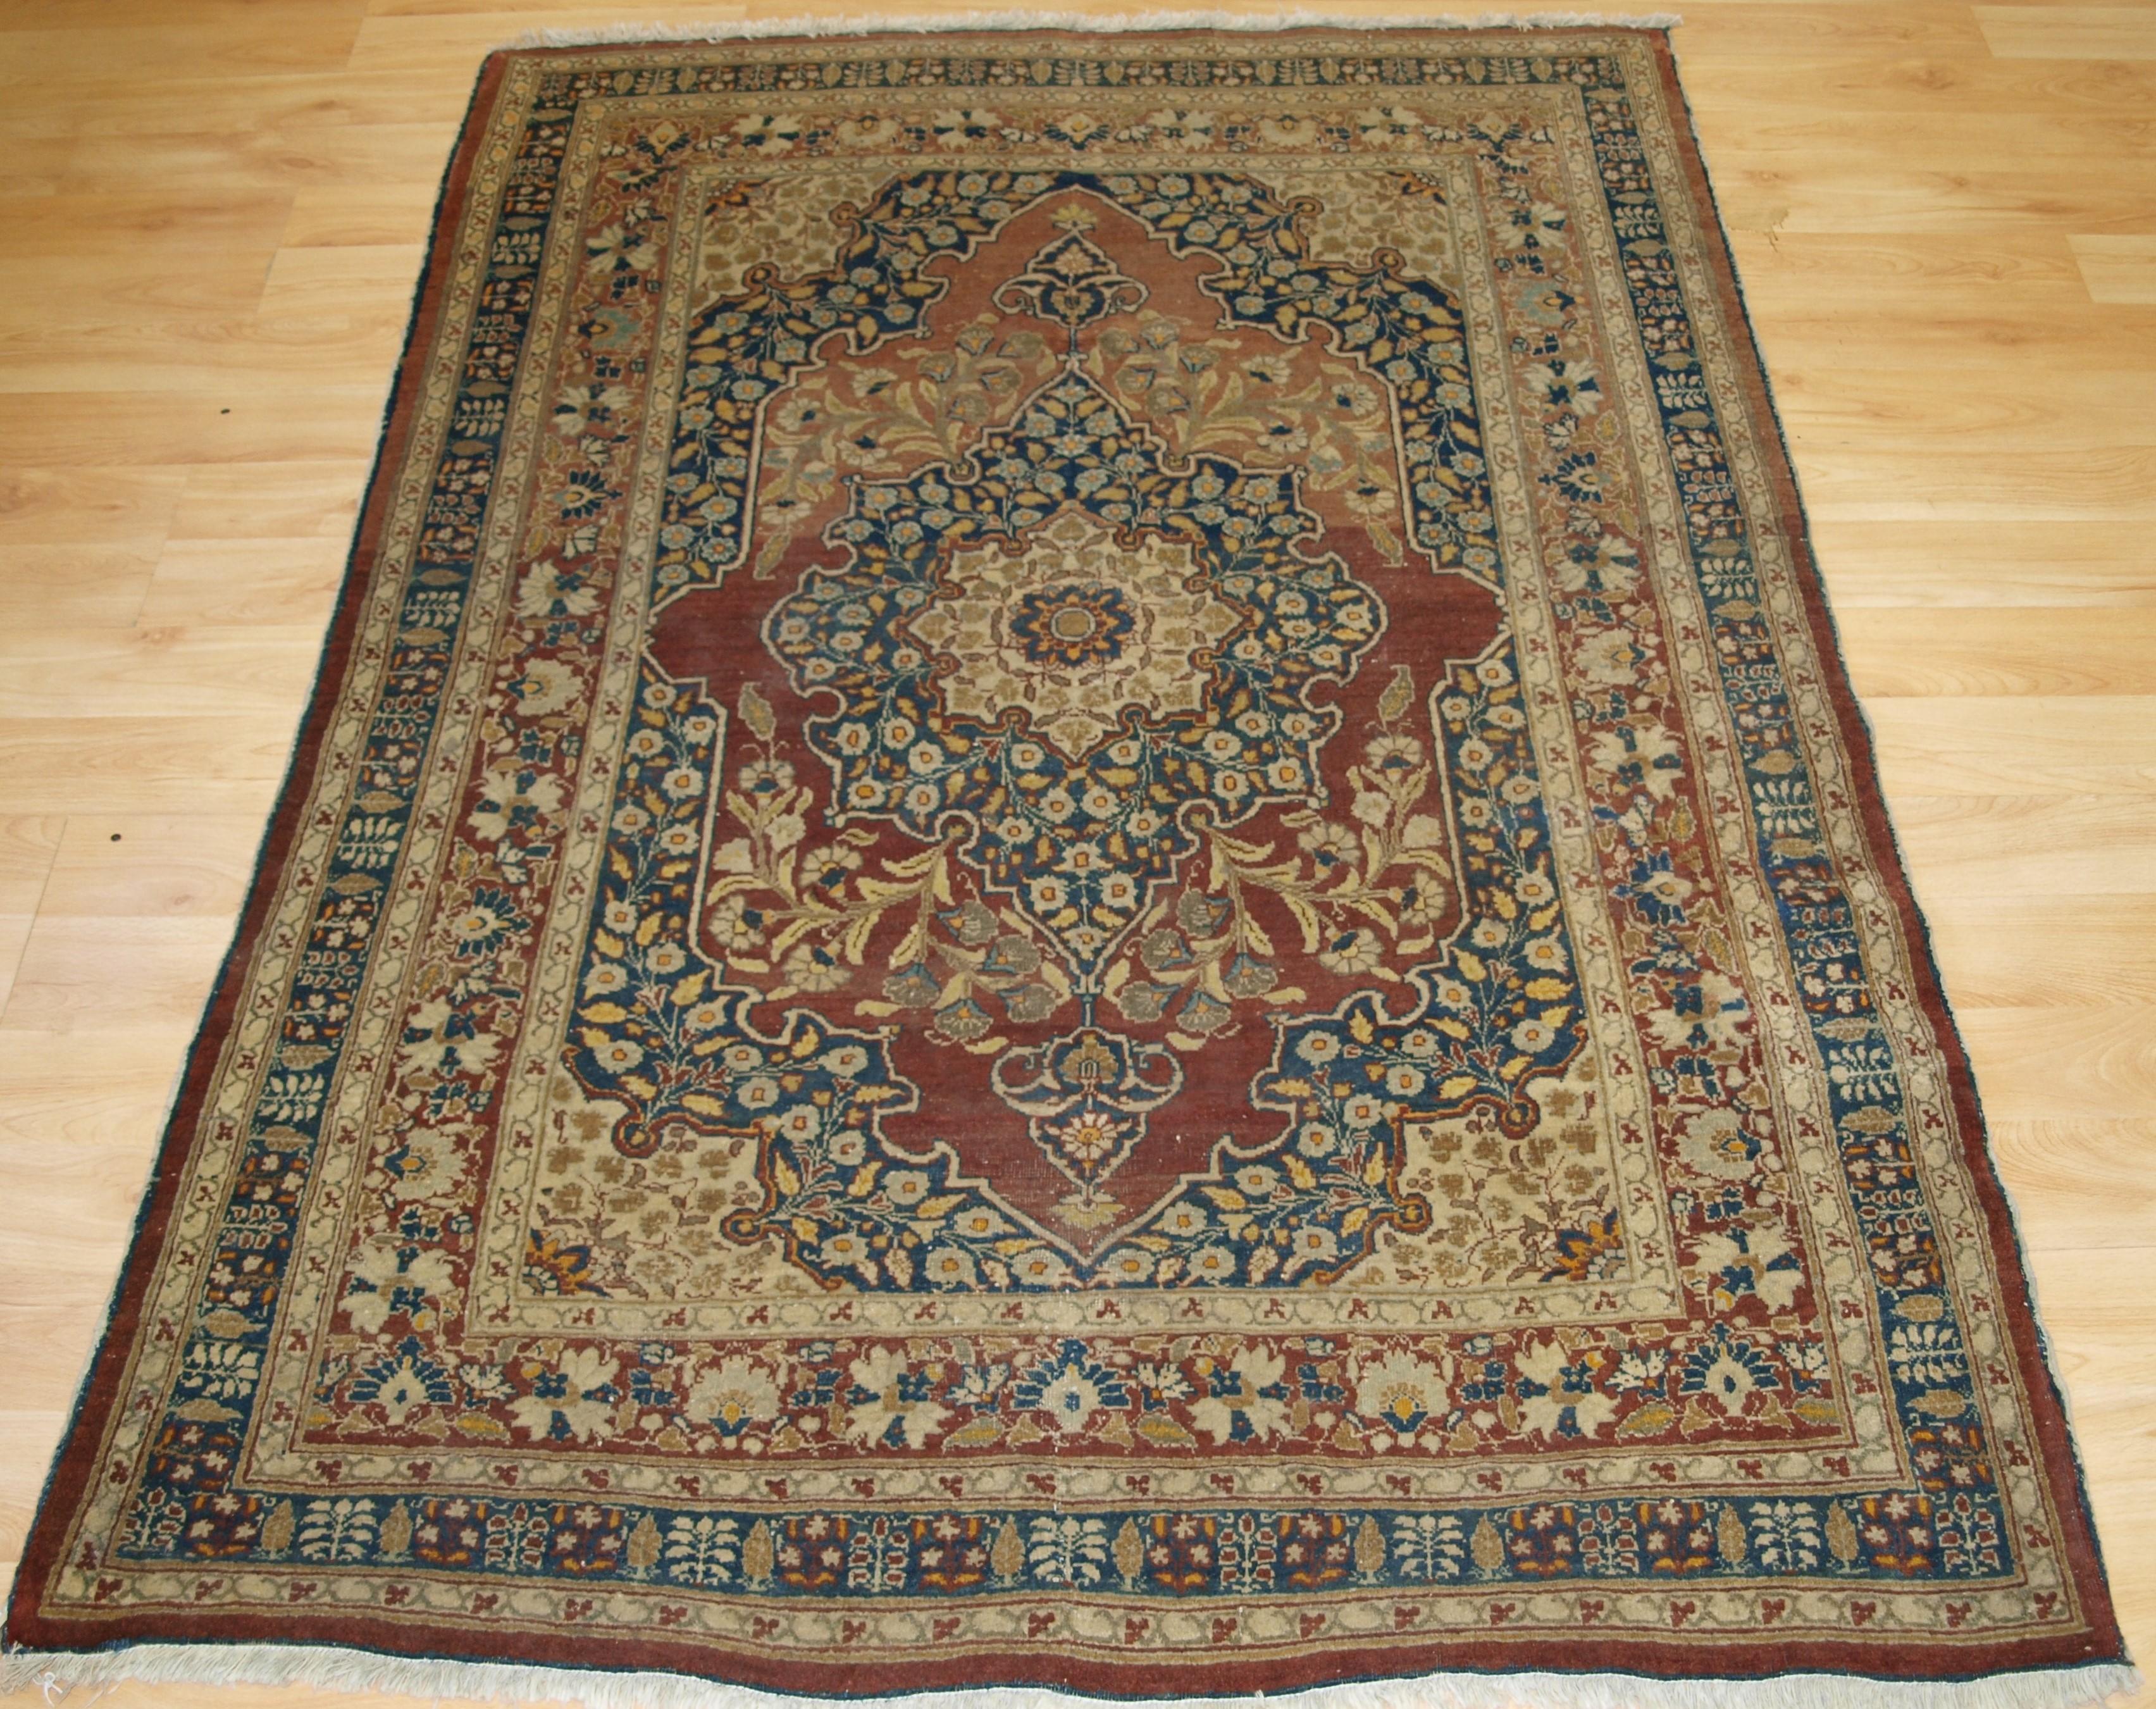 Antique Tabriz Rug Of Classic Design With A Central Medallion Surrounded Fl Sprays